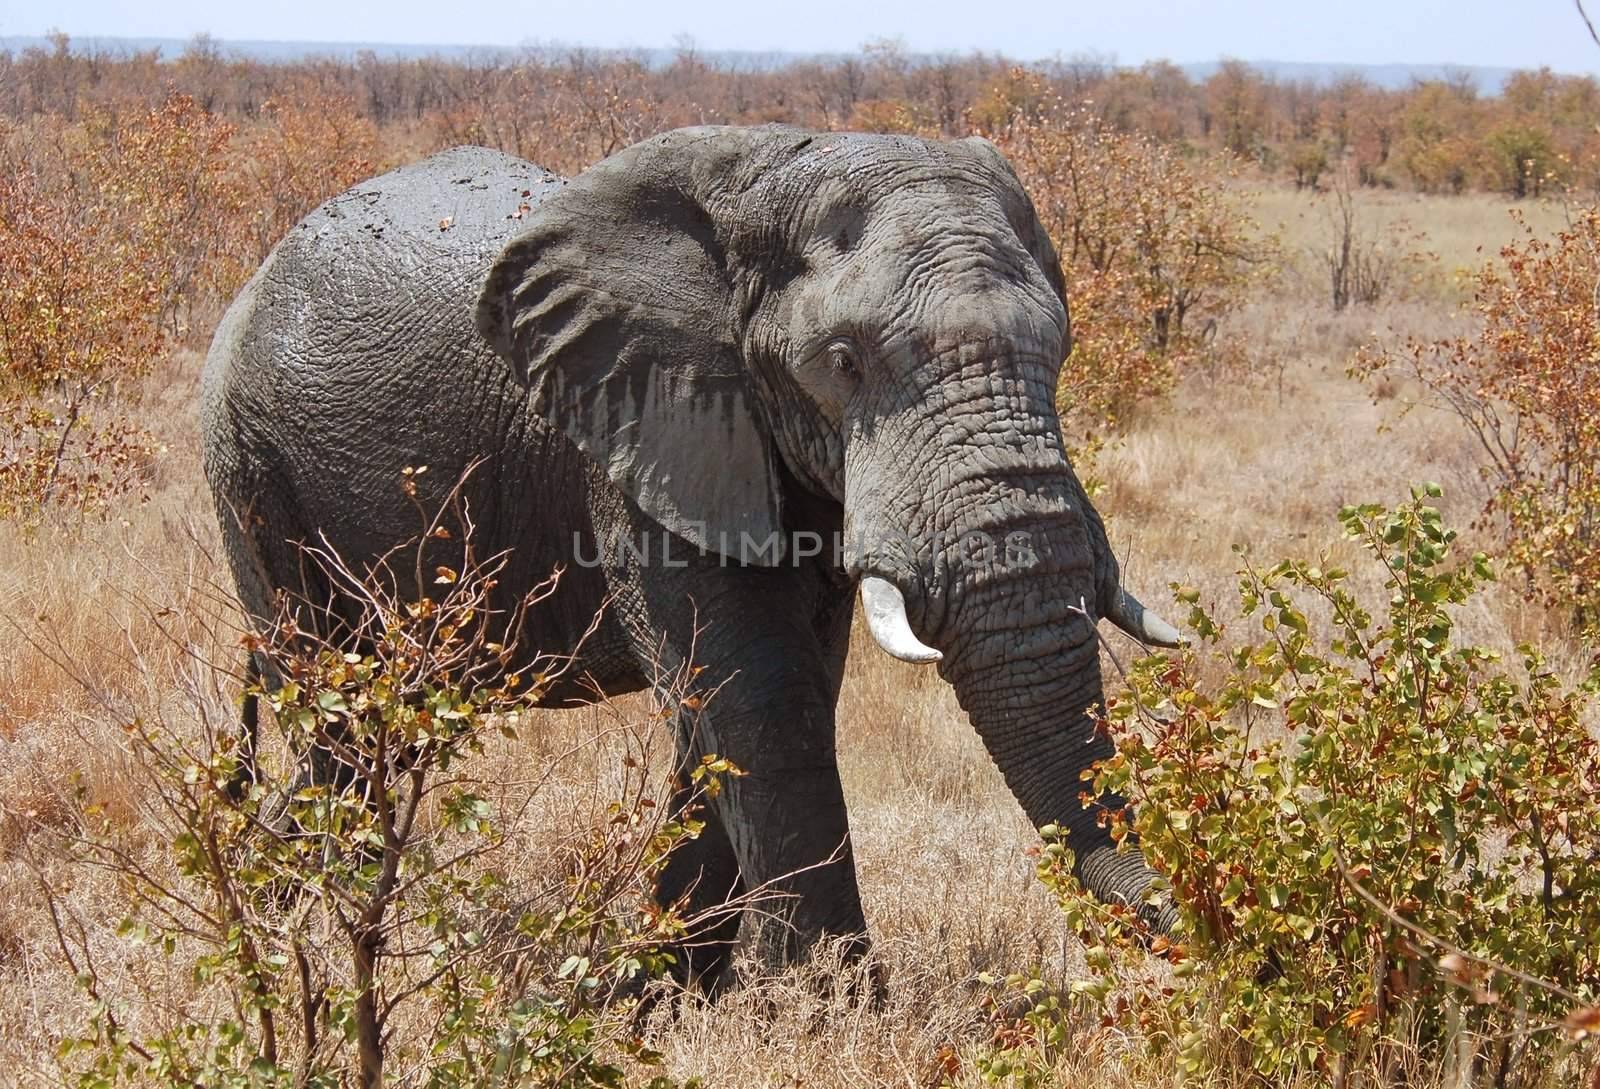 An African Elephant (Loxodonta africana) in the Kruger Park, South Africa.